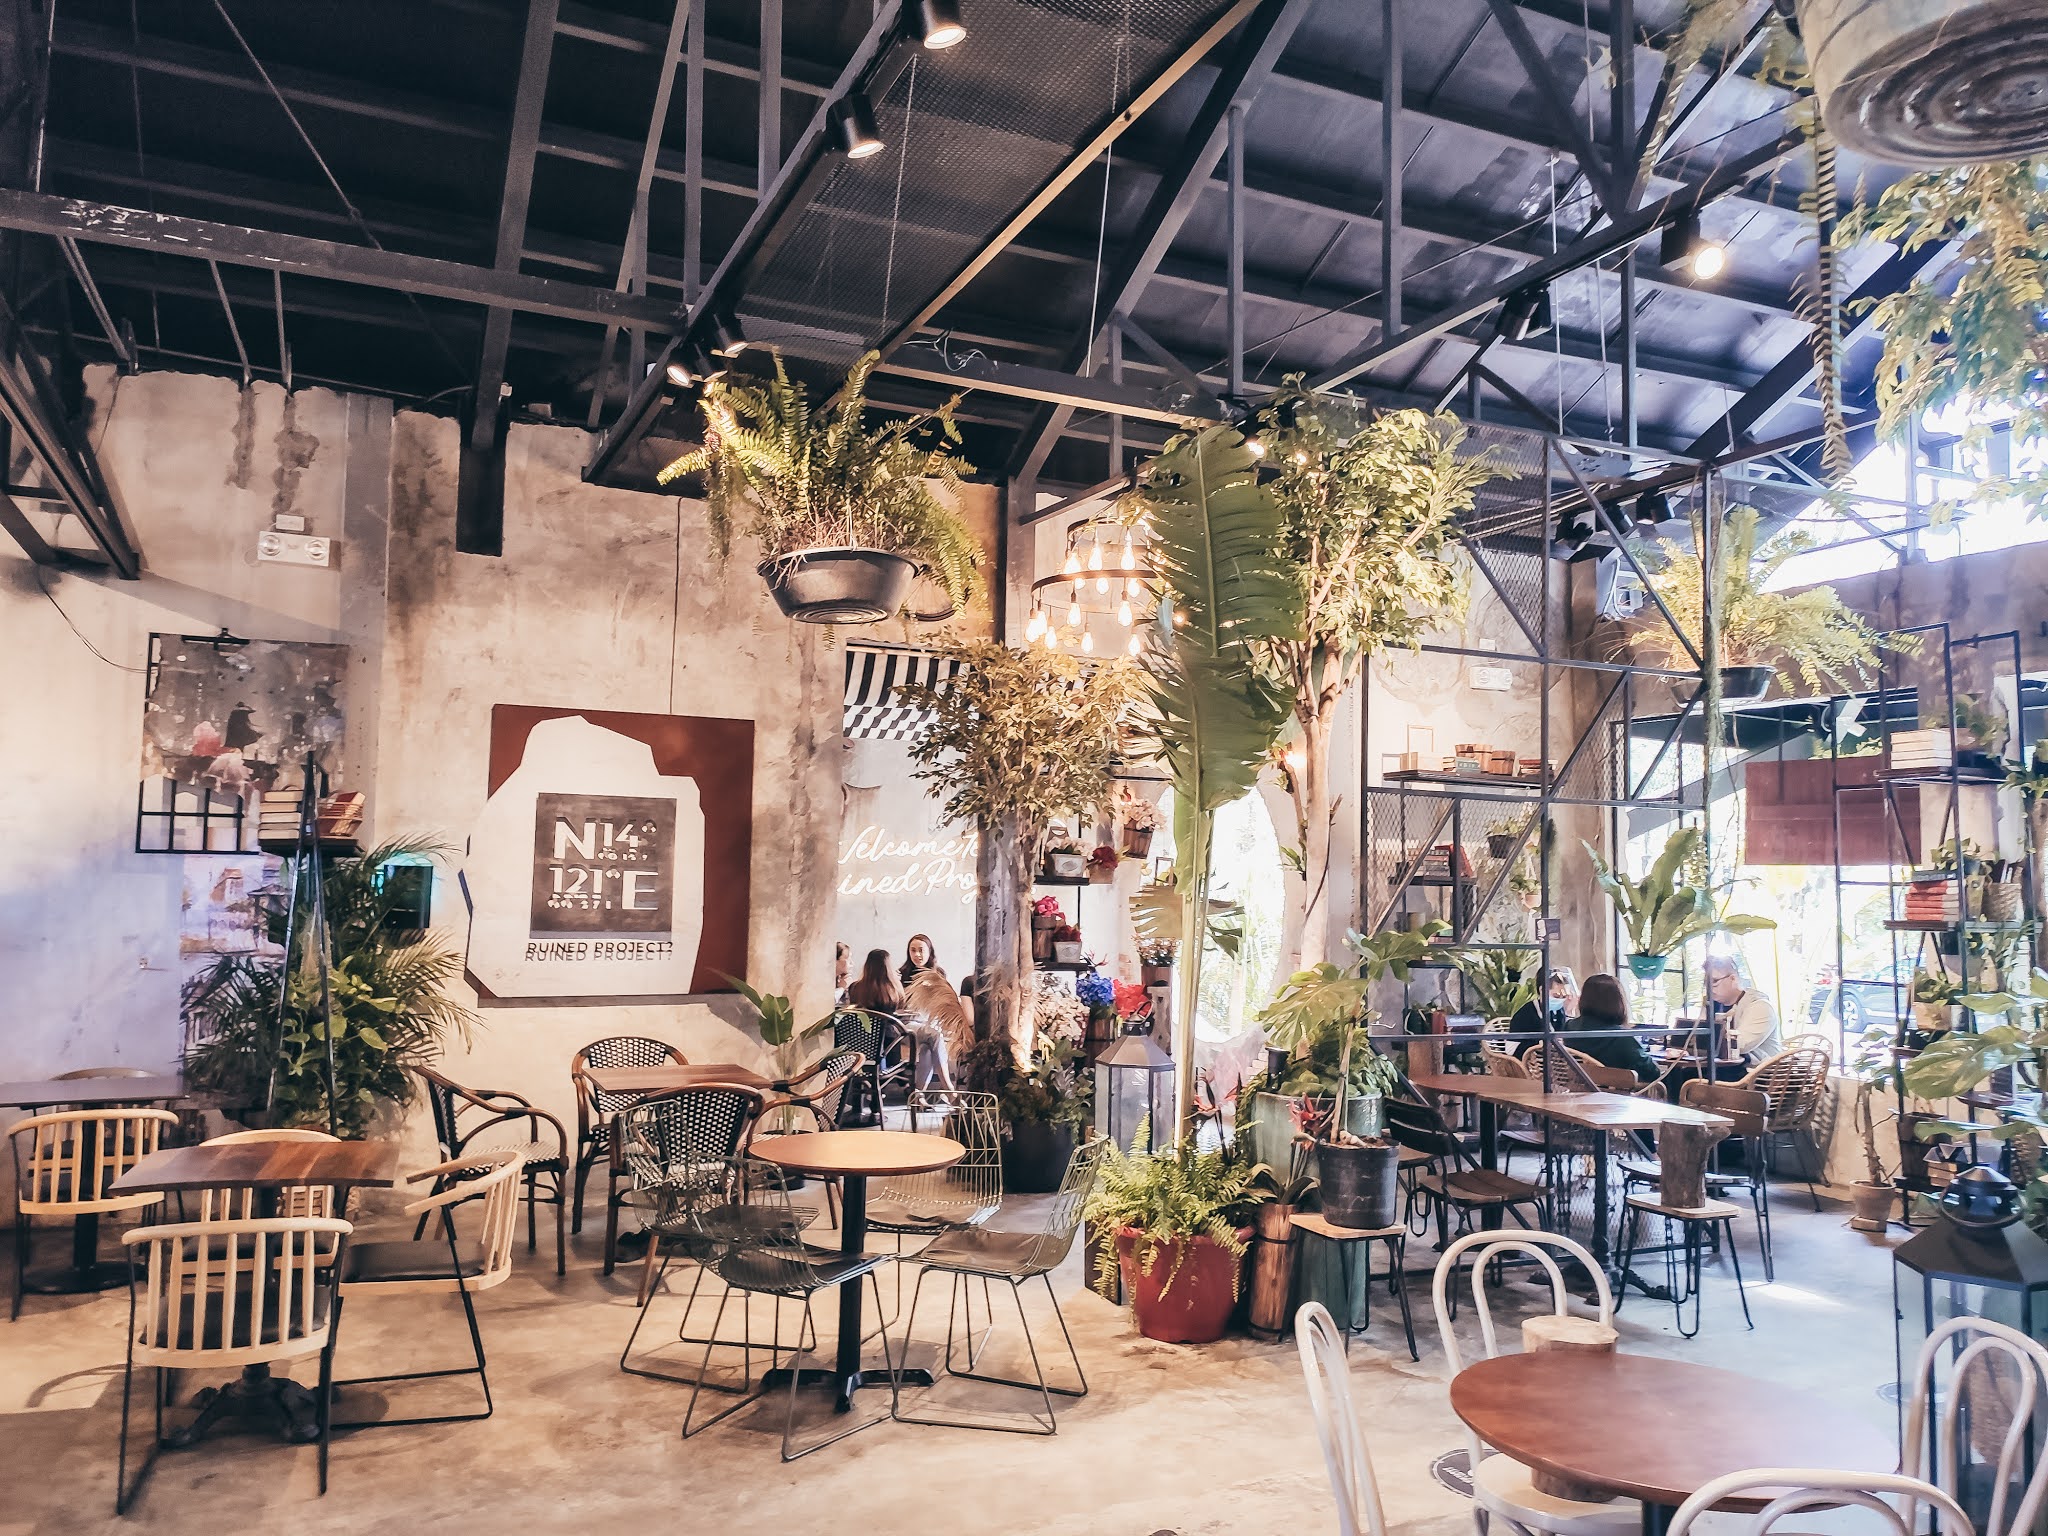 Ruined Project? : The Instagram-Worthy Cafe in Tagaytay - The Pinoy ...